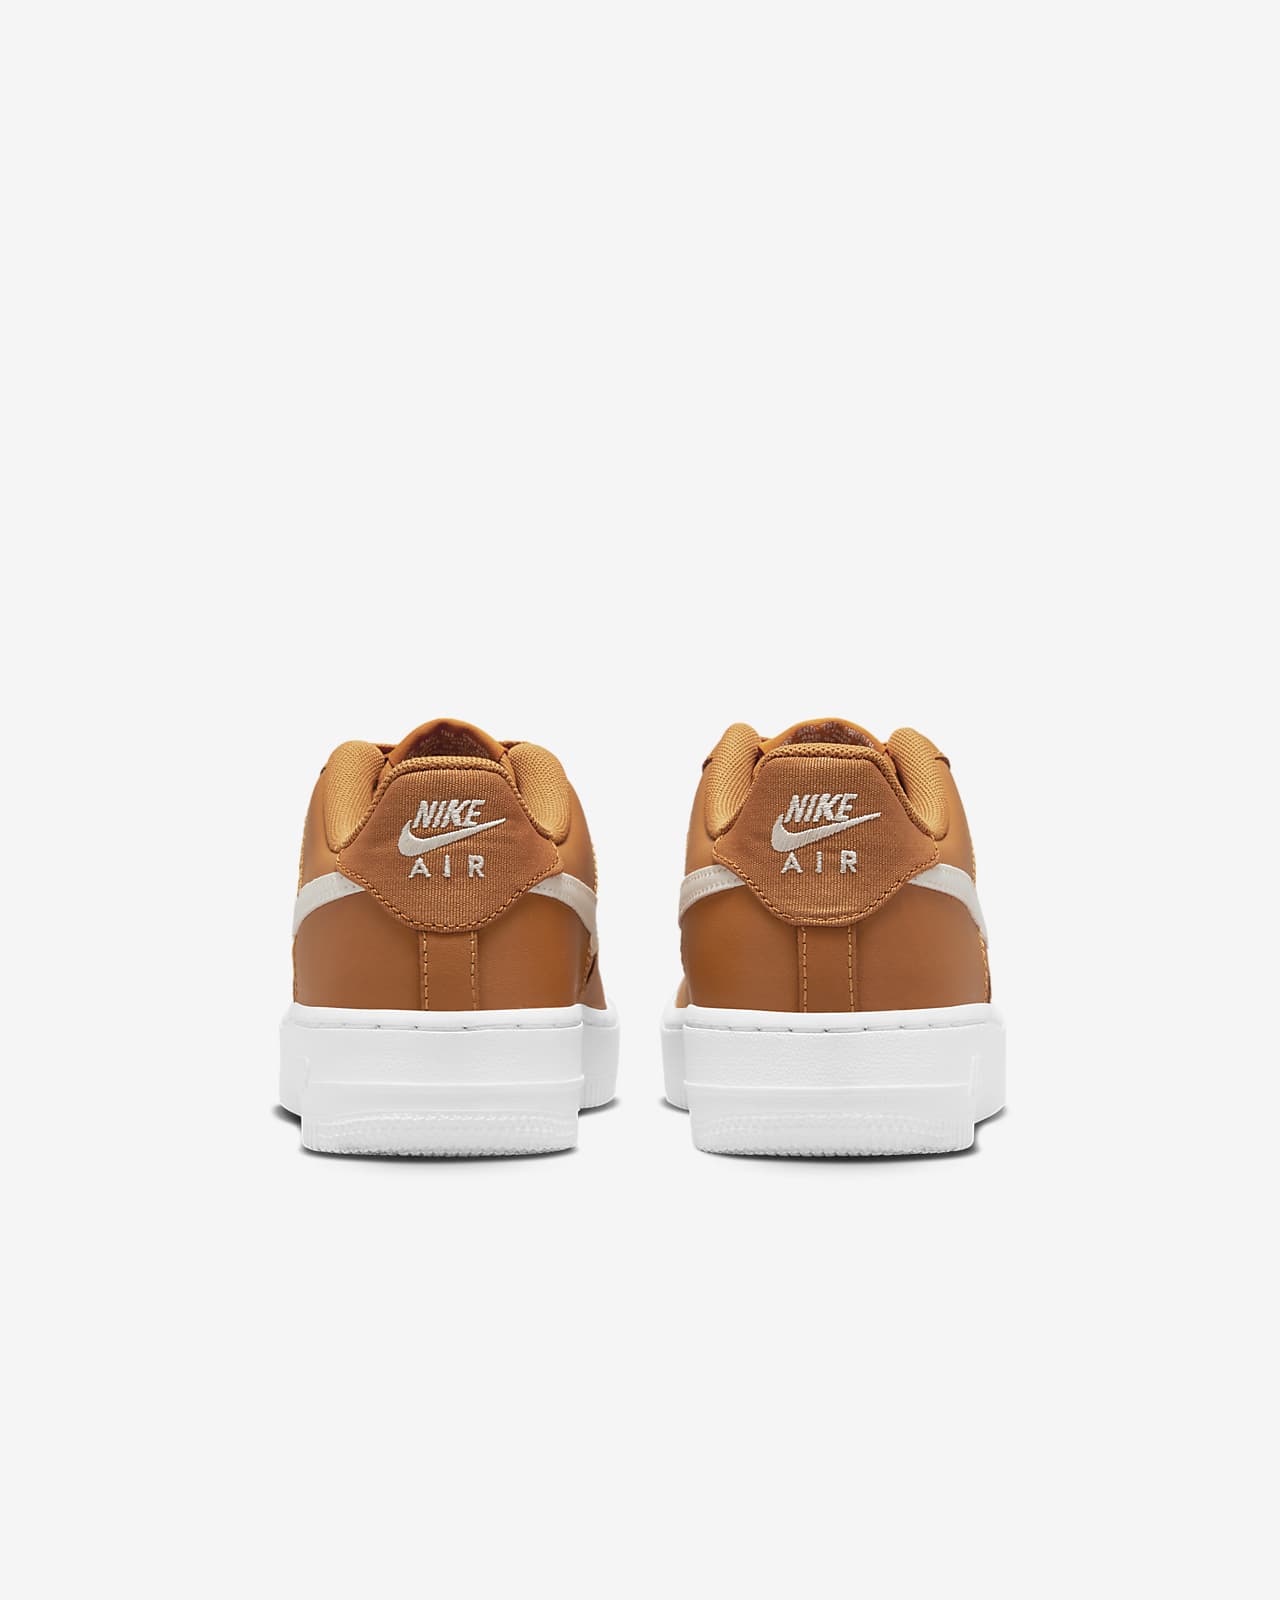 Buy AIR FORCE 1 LV8 2 (GS) - N/A 0.0 on !